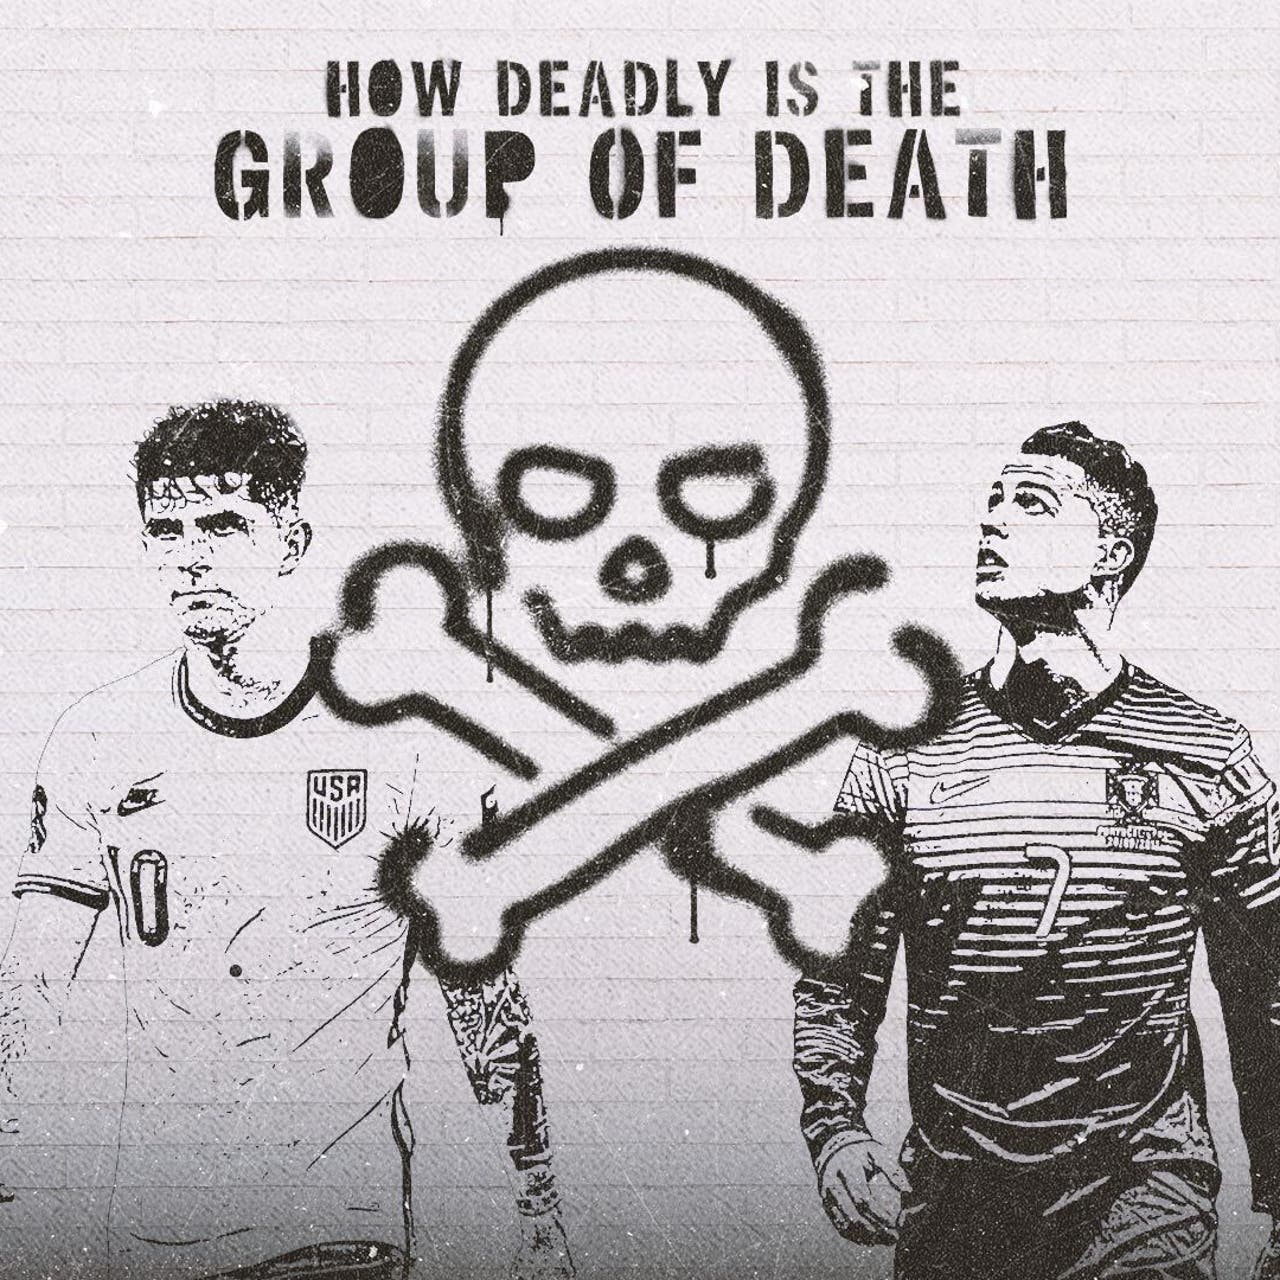 Which is the World Cup 2022 'Group of Death'?